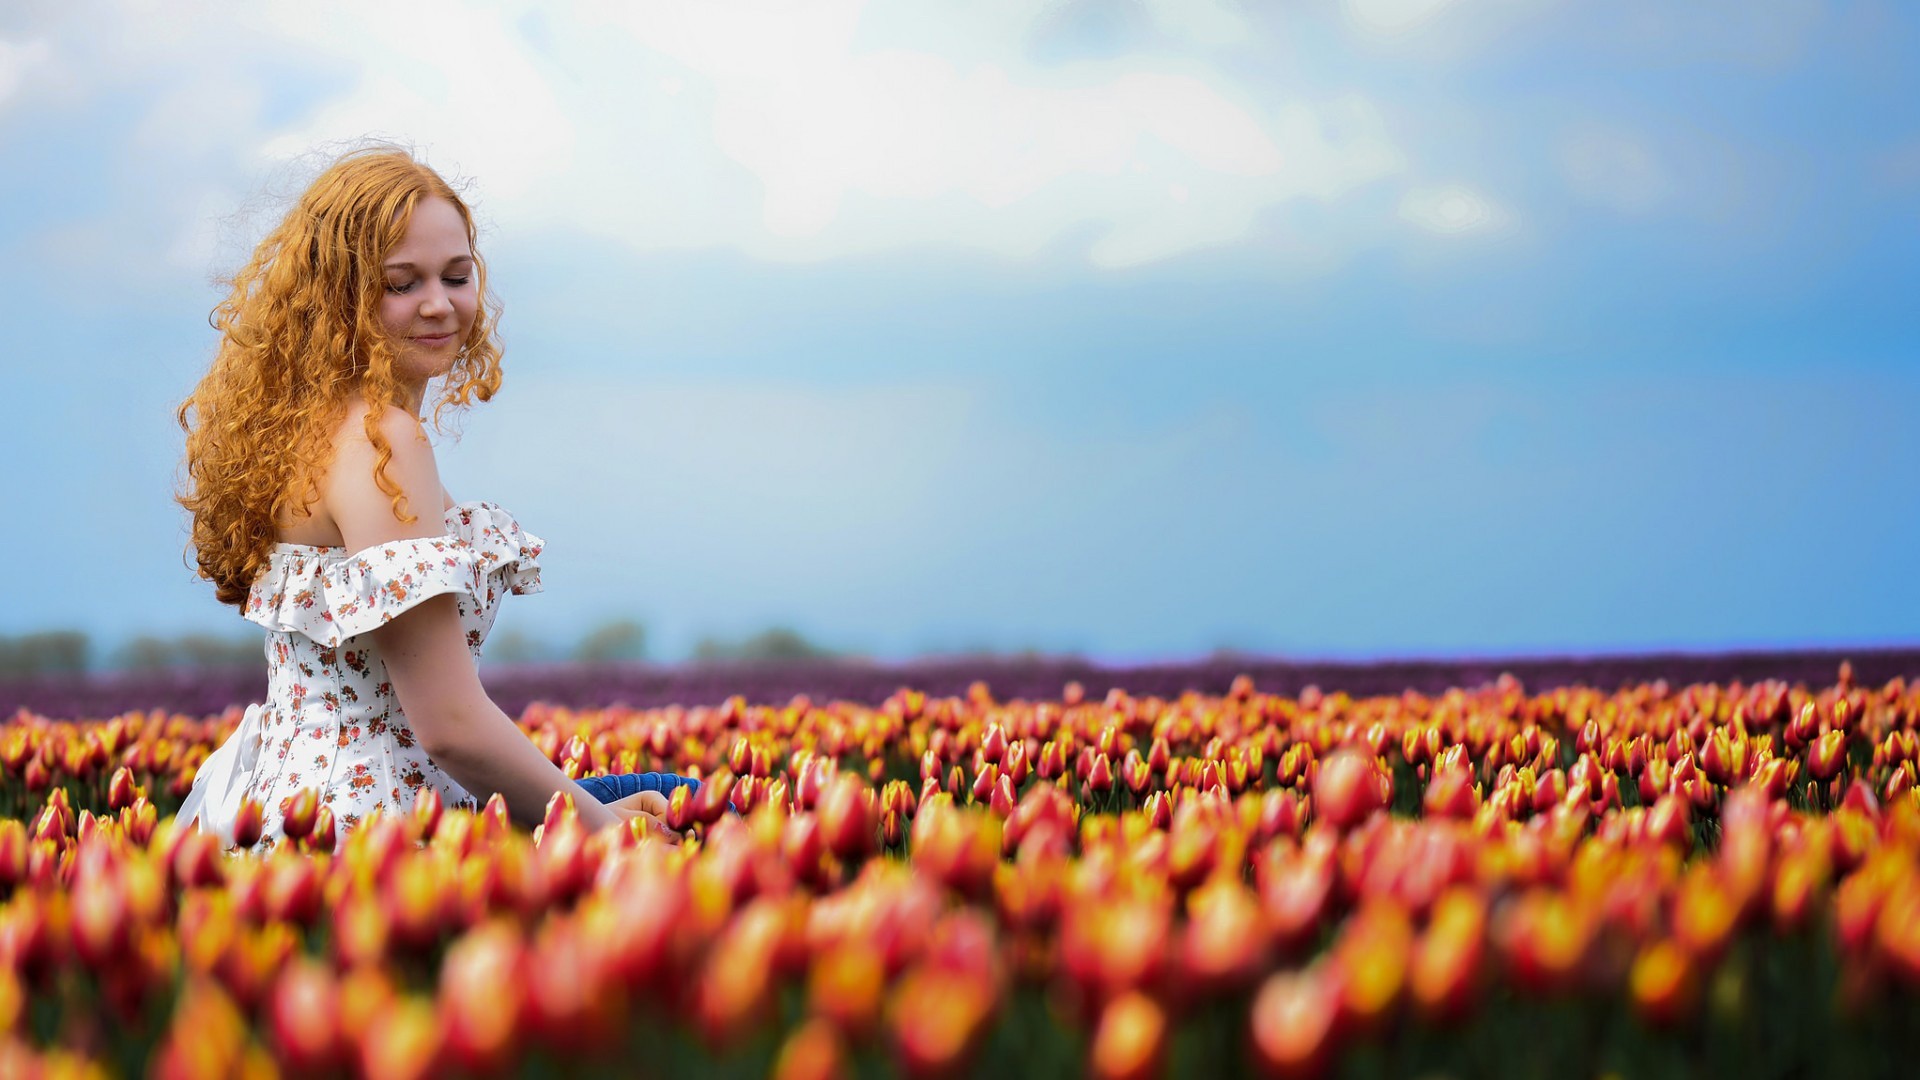 People 1920x1080 women model redhead long hair women outdoors curly hair bare shoulders smiling closed eyes dress field flowers tulips depth of field Agro (Plants) plants summer dress white clothing sitting sky outdoors dyed hair